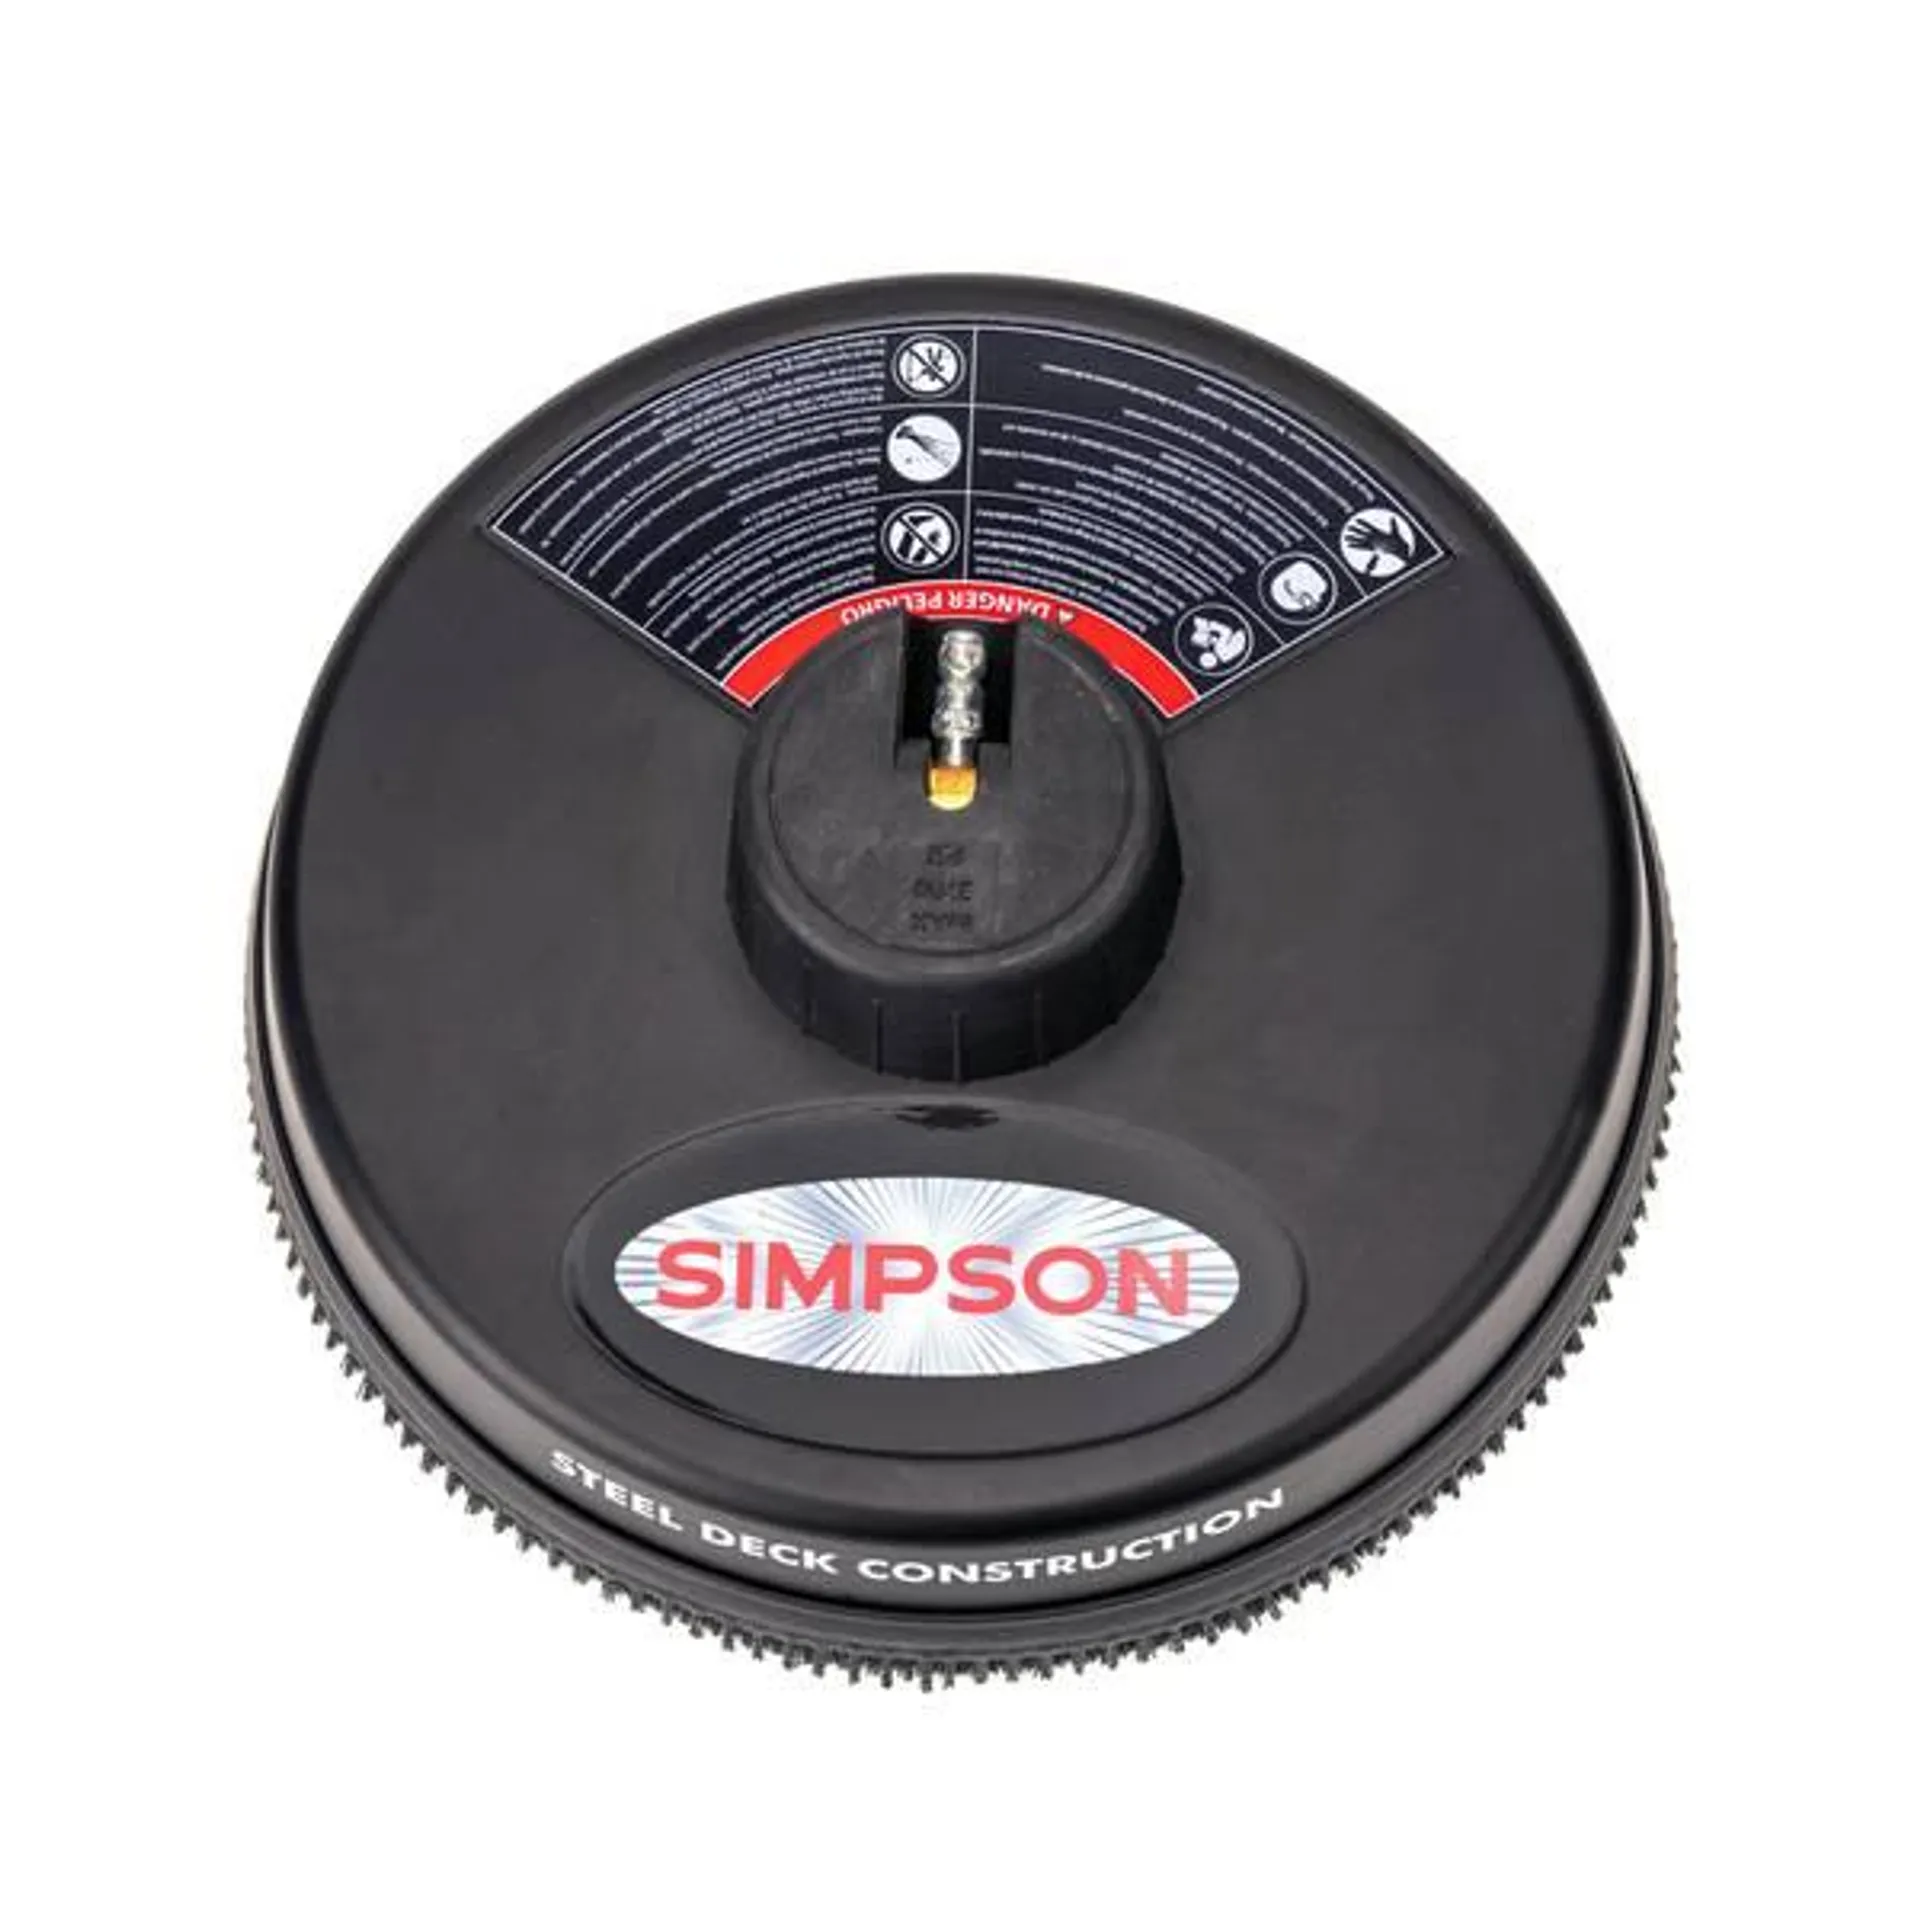 SIMPSON Universal 15" Pressure Washer Surface Cleaner